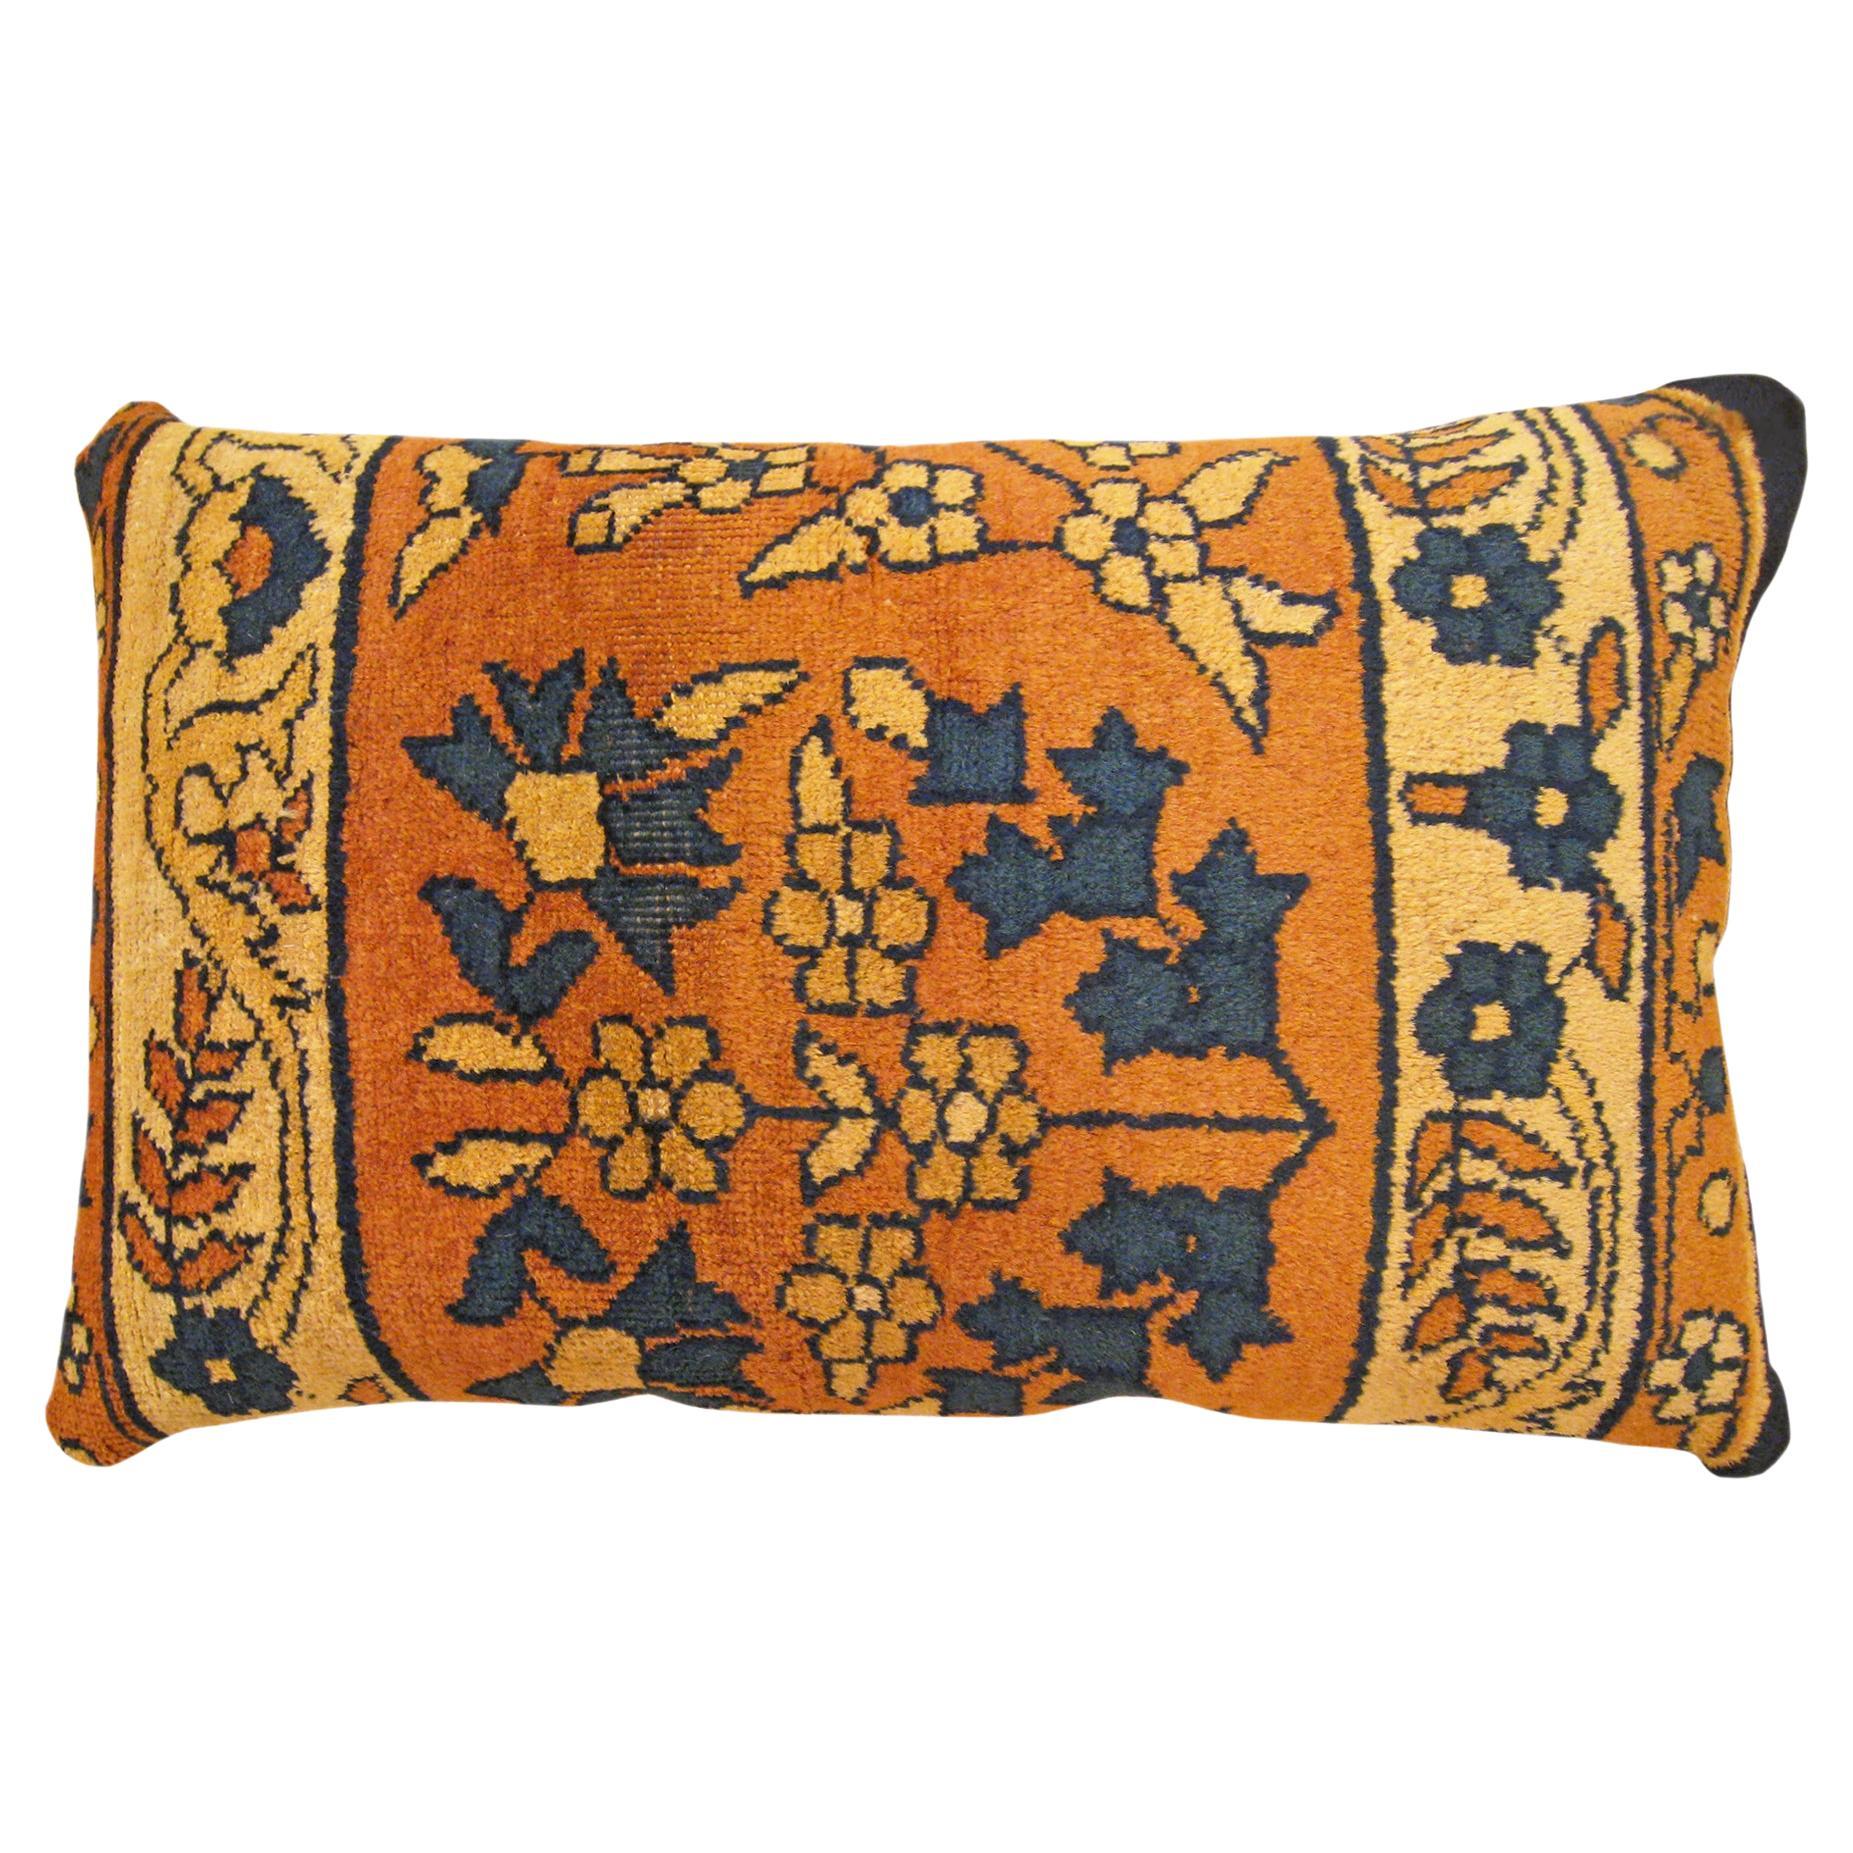  Decorative Antique Indian Agra Rug Pillow with Floral Elements Allover